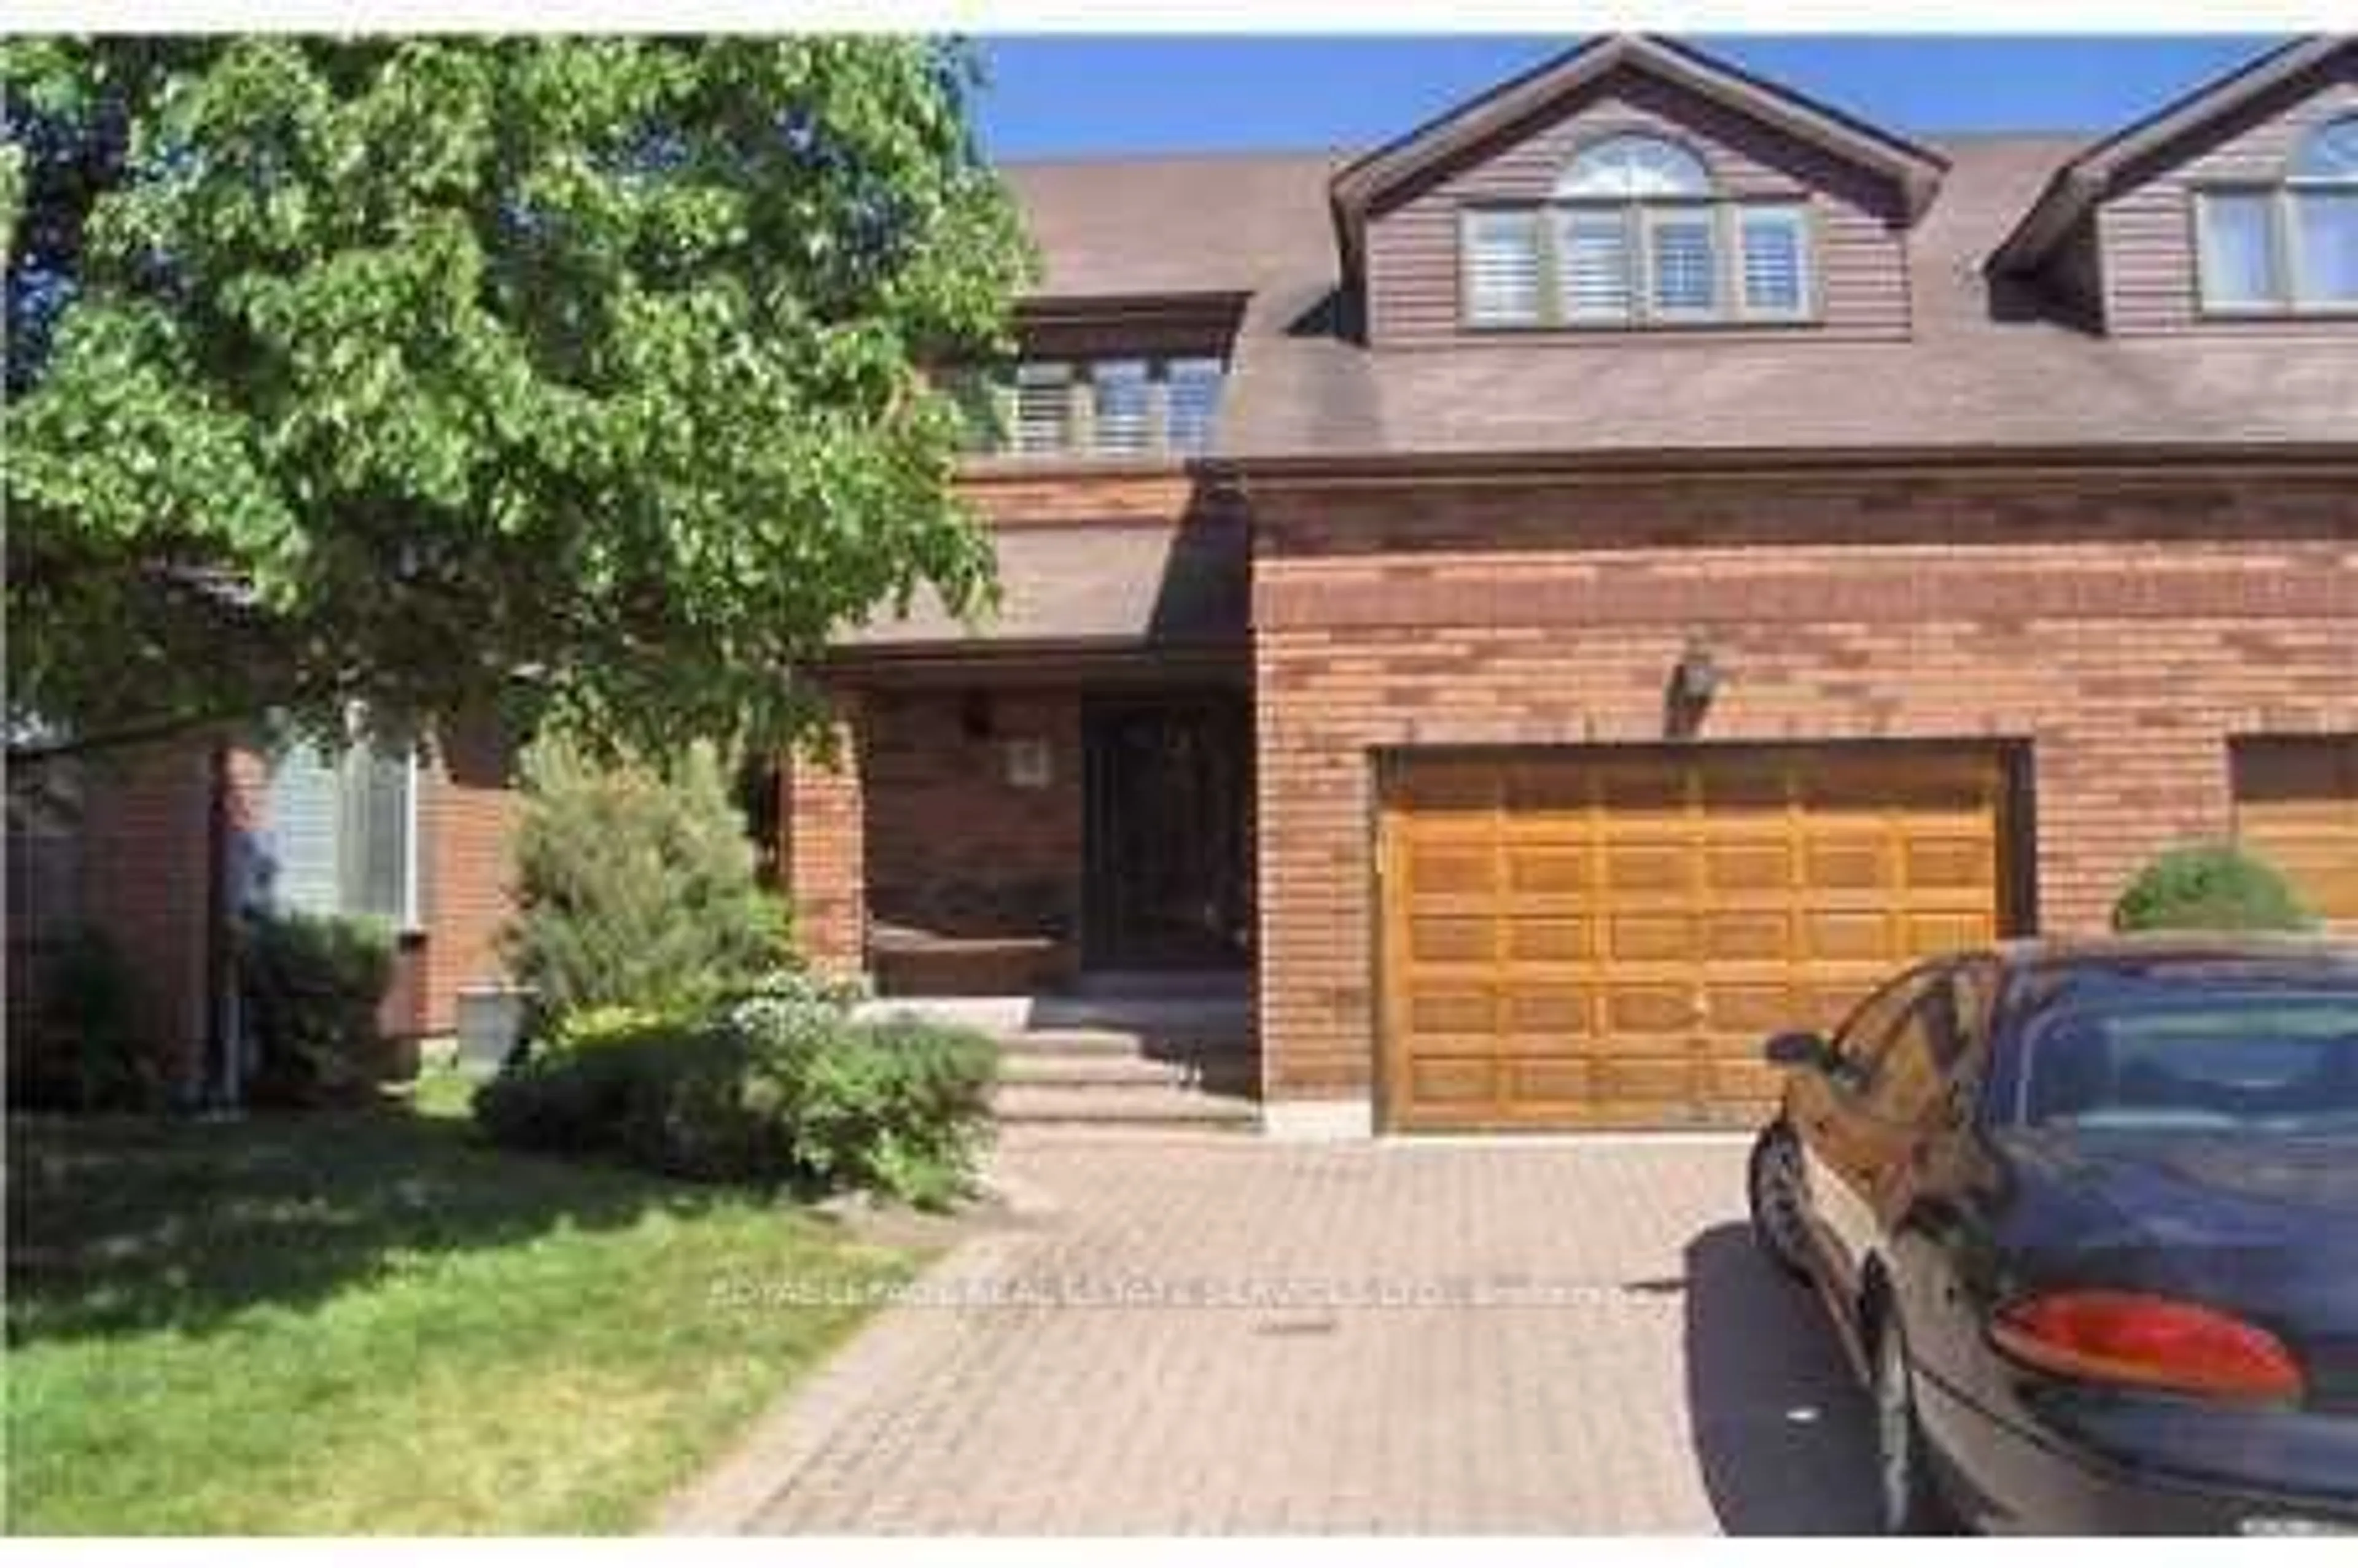 Home with brick exterior material for 192 Green Briar Rd, New Tecumseth Ontario L9R 1Y1